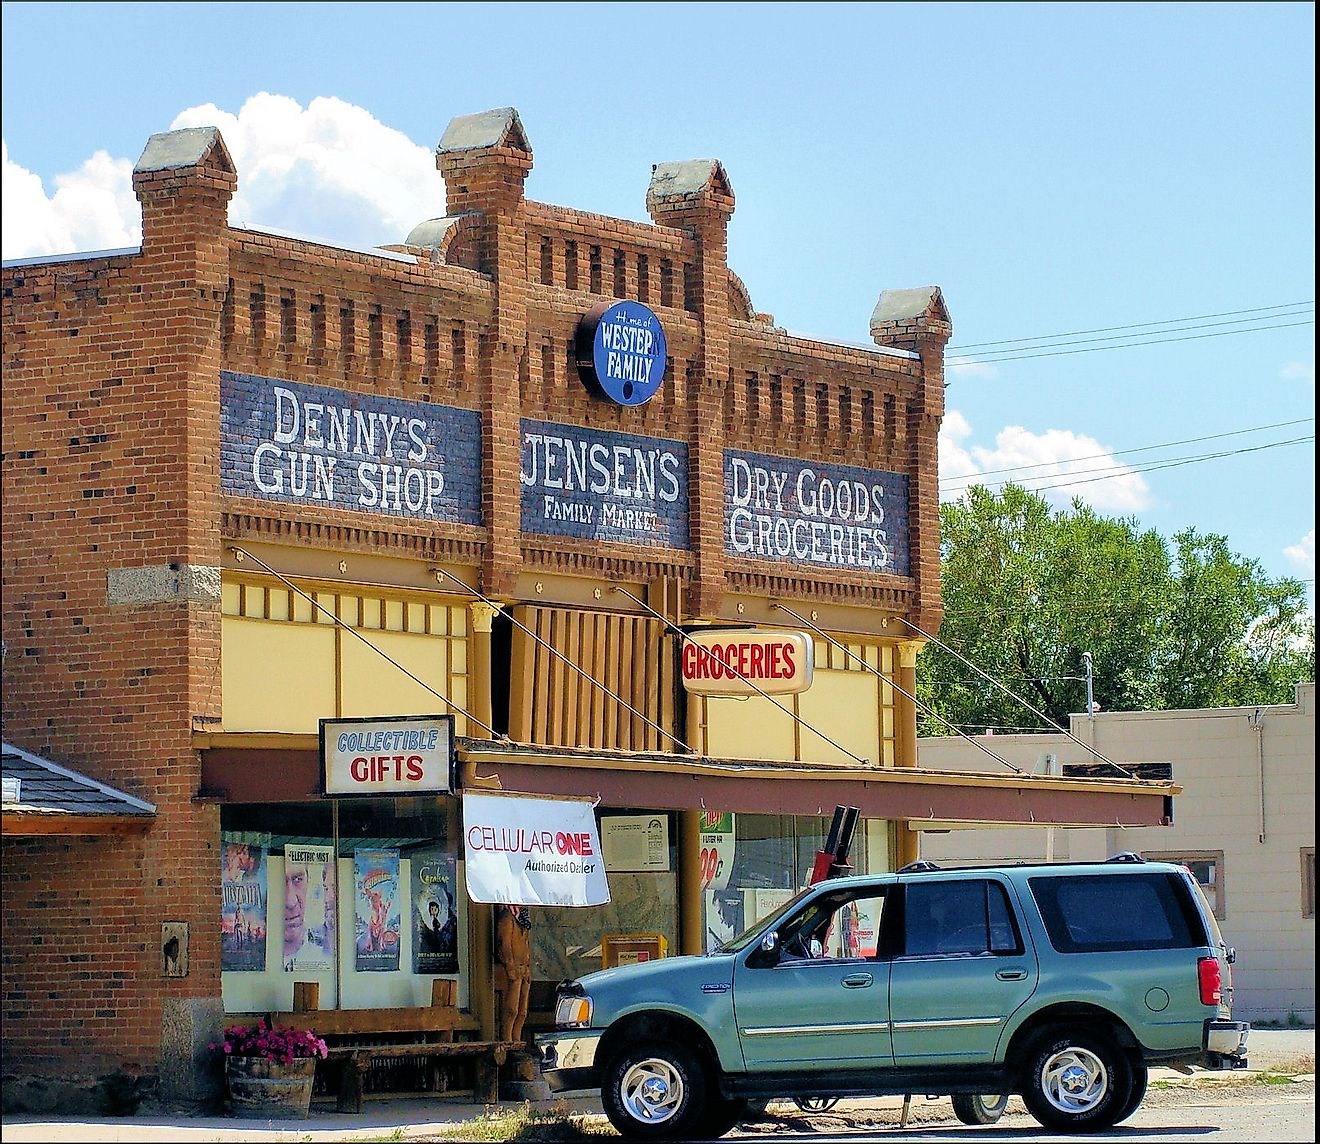 The H.D. Rossiter Building, a historic general store in Sheridan, Montana, United States.